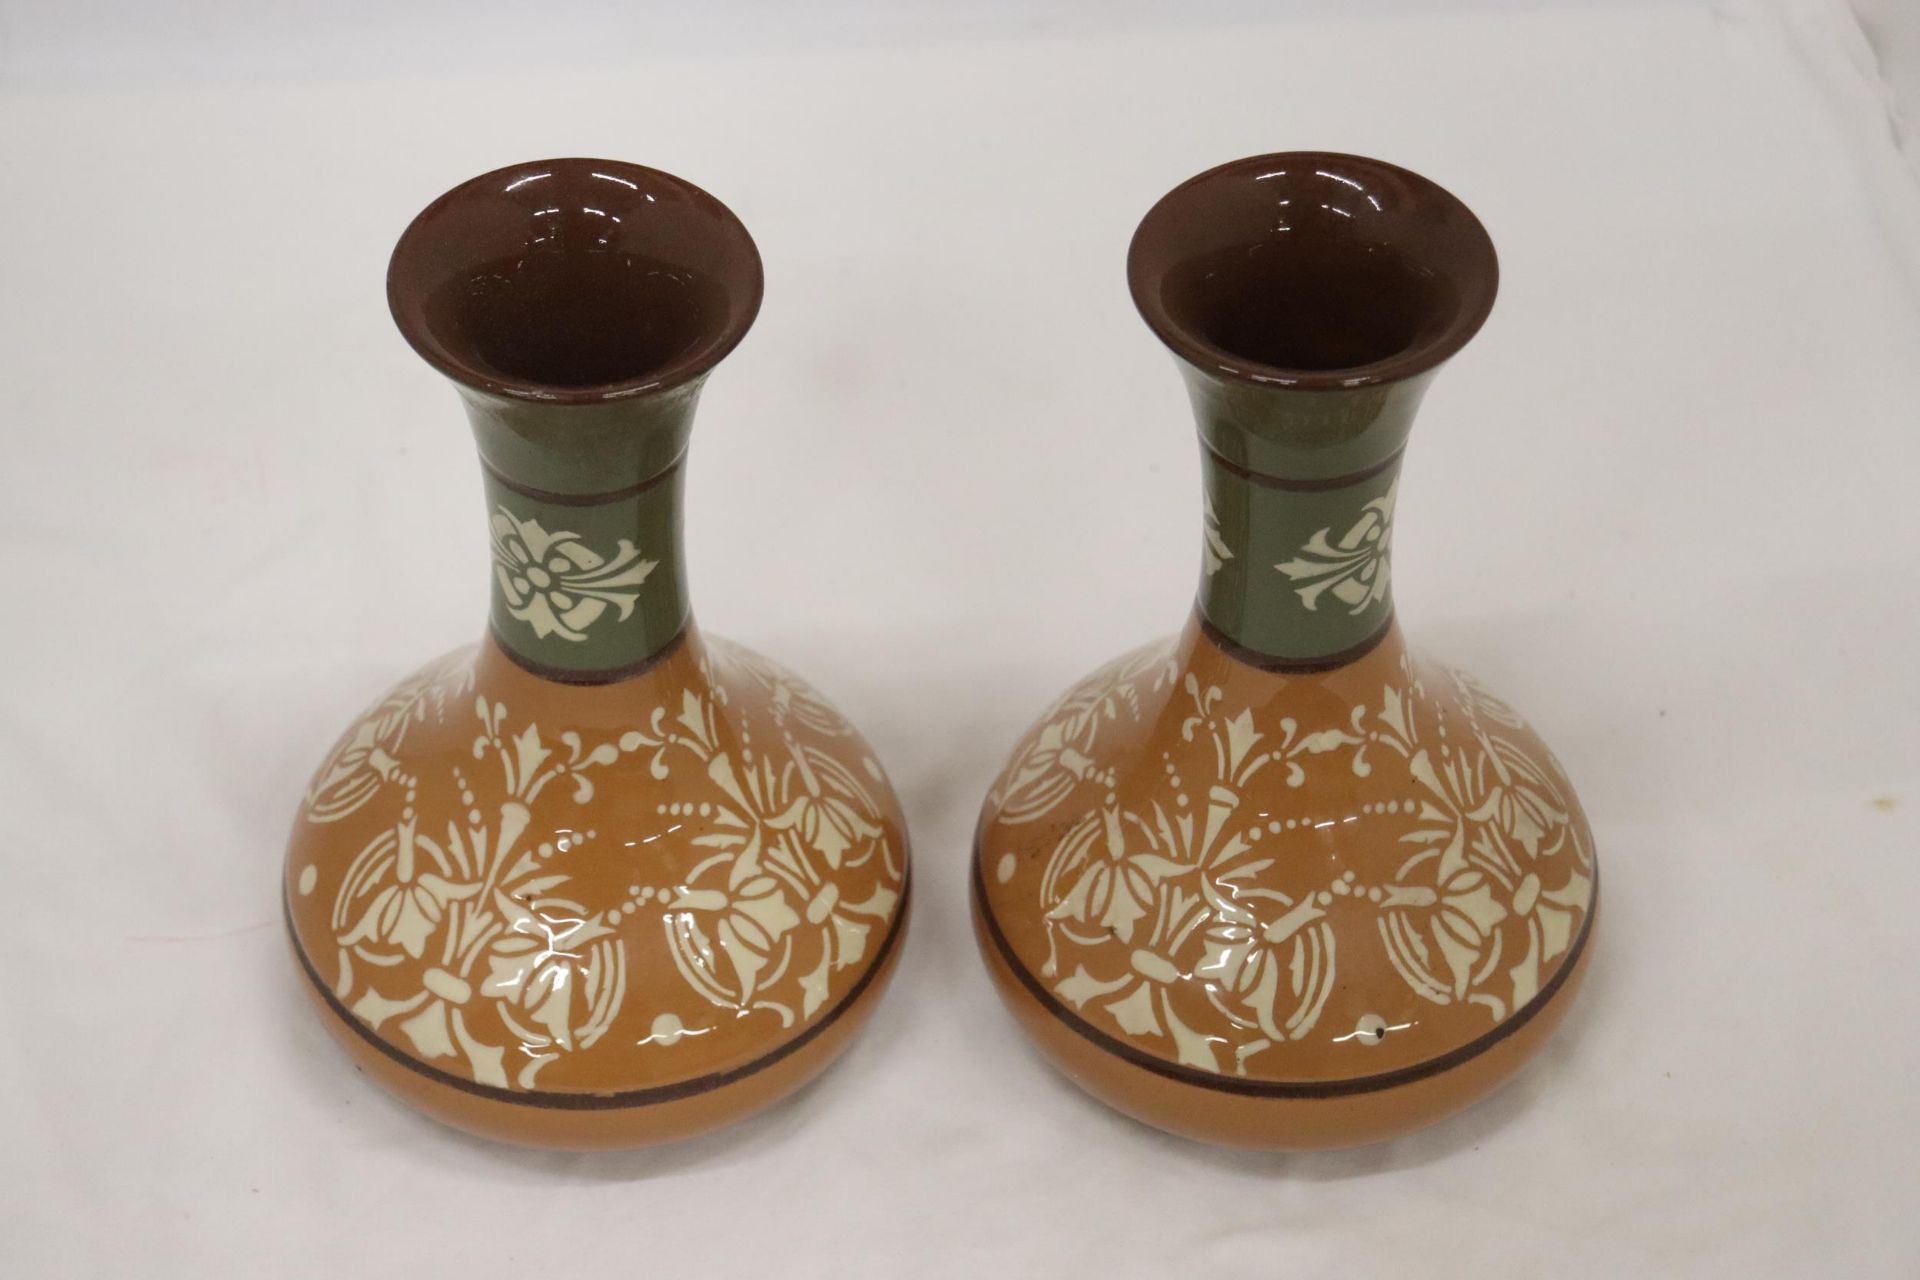 A PAIR OF LANGLEY LOVIQUE WARE ART POTTERY VASES - Image 3 of 4